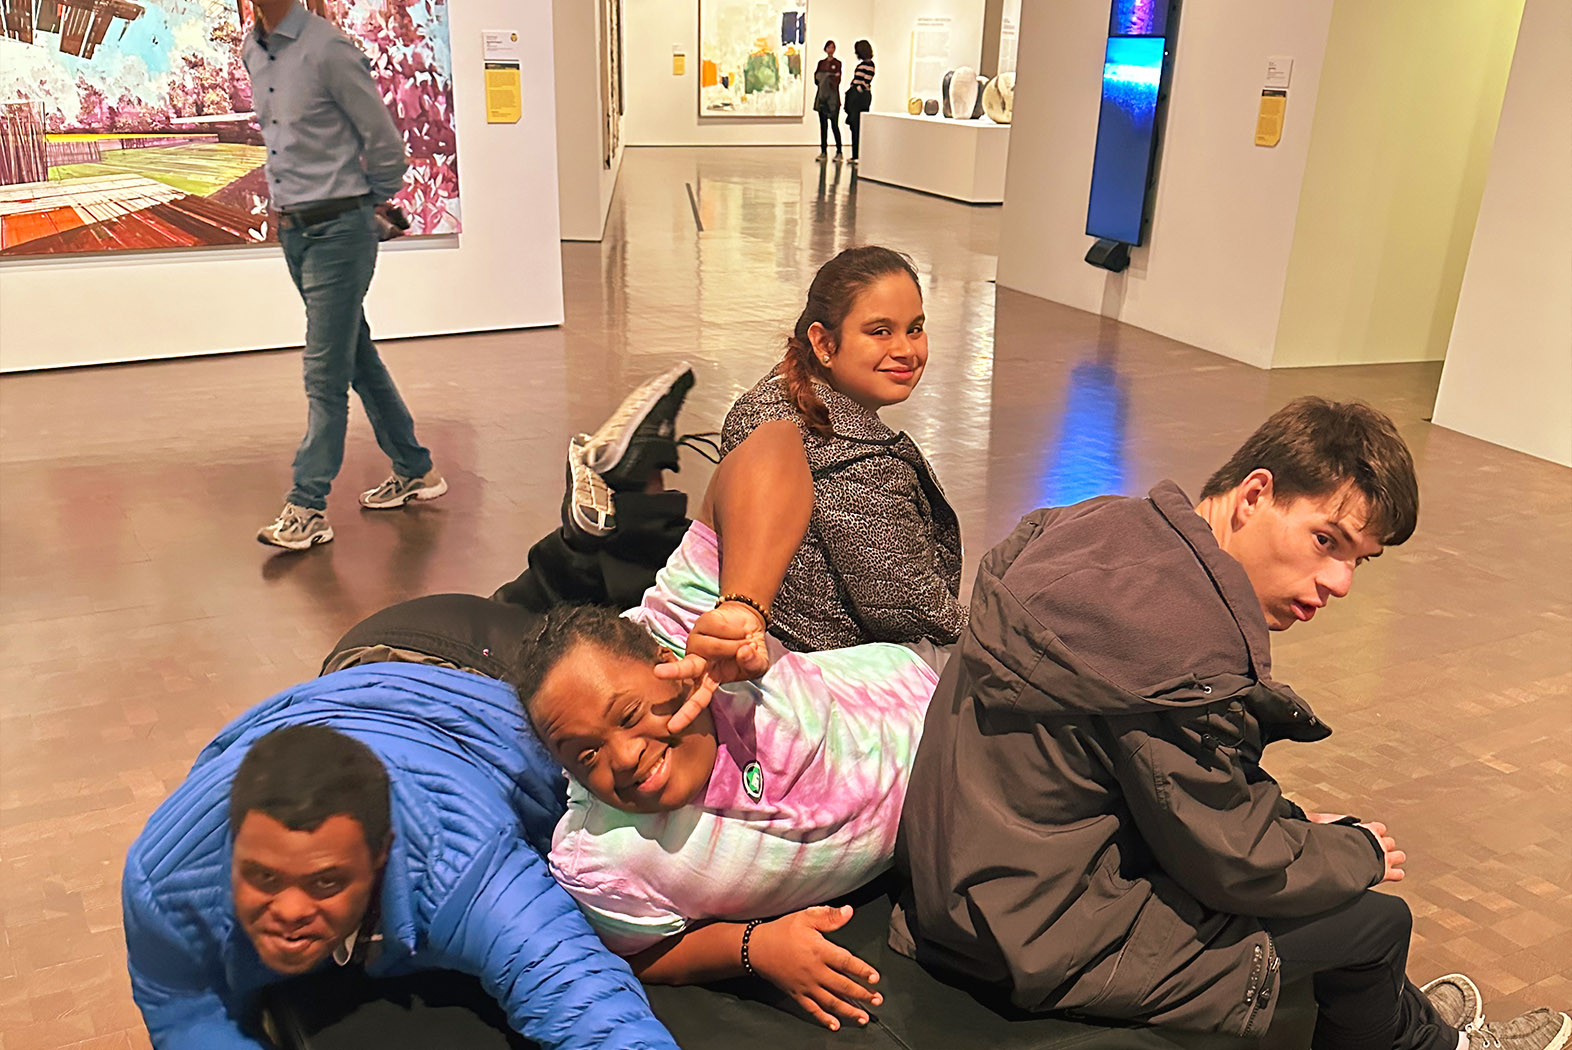 young adults sitting on a bench at an art gallery